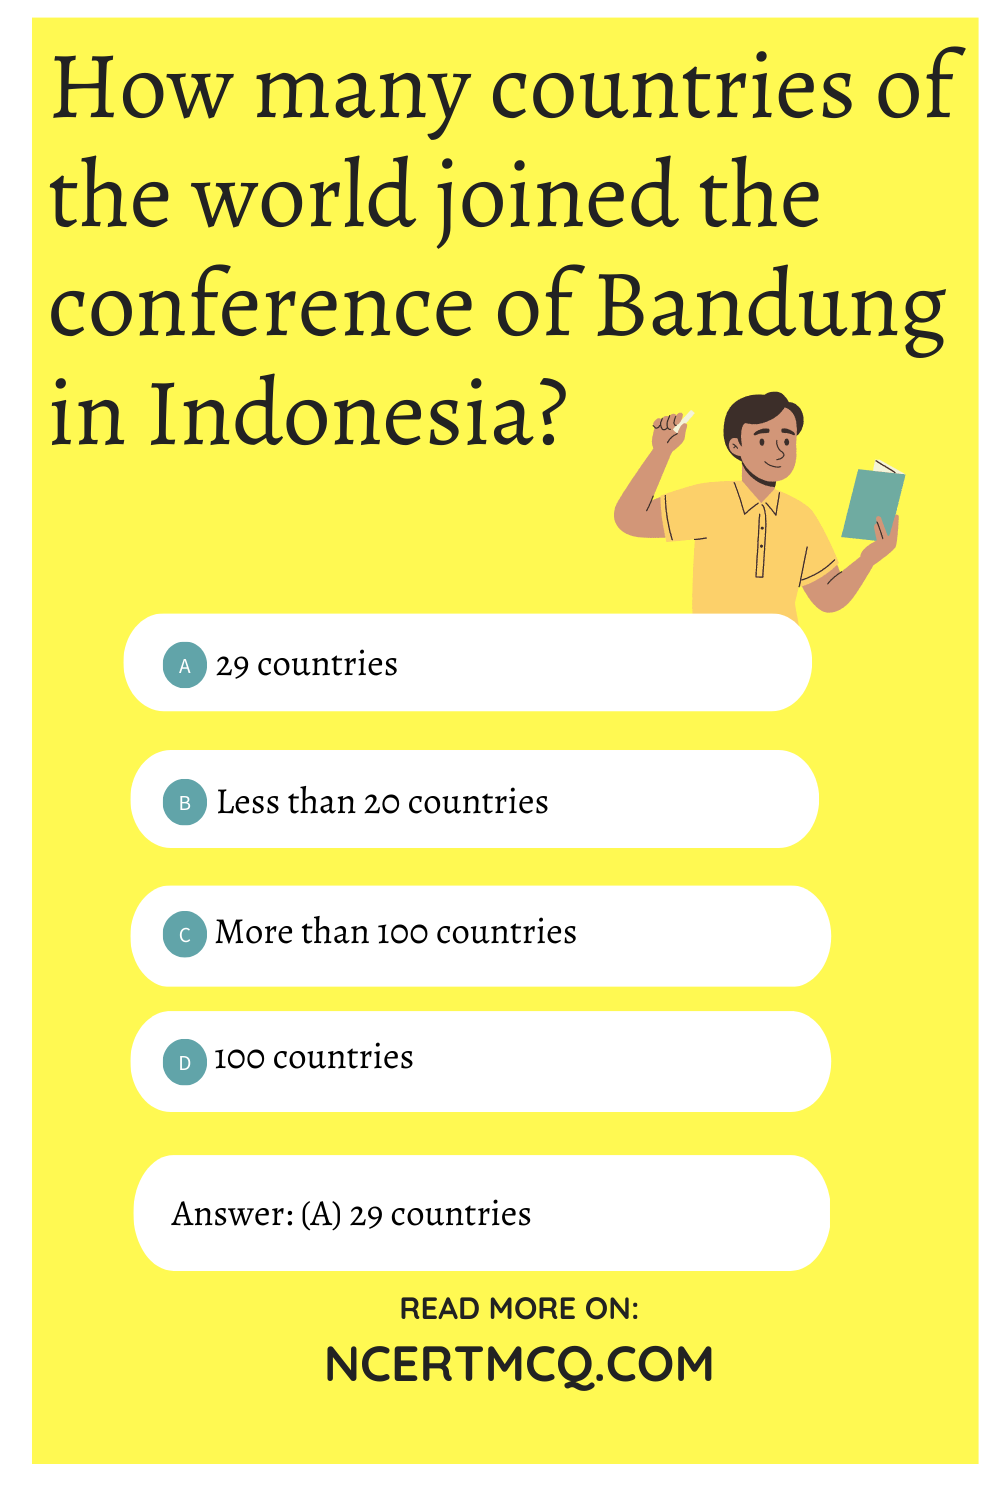 How many countries of the world joined the conference of Bandung in Indonesia?